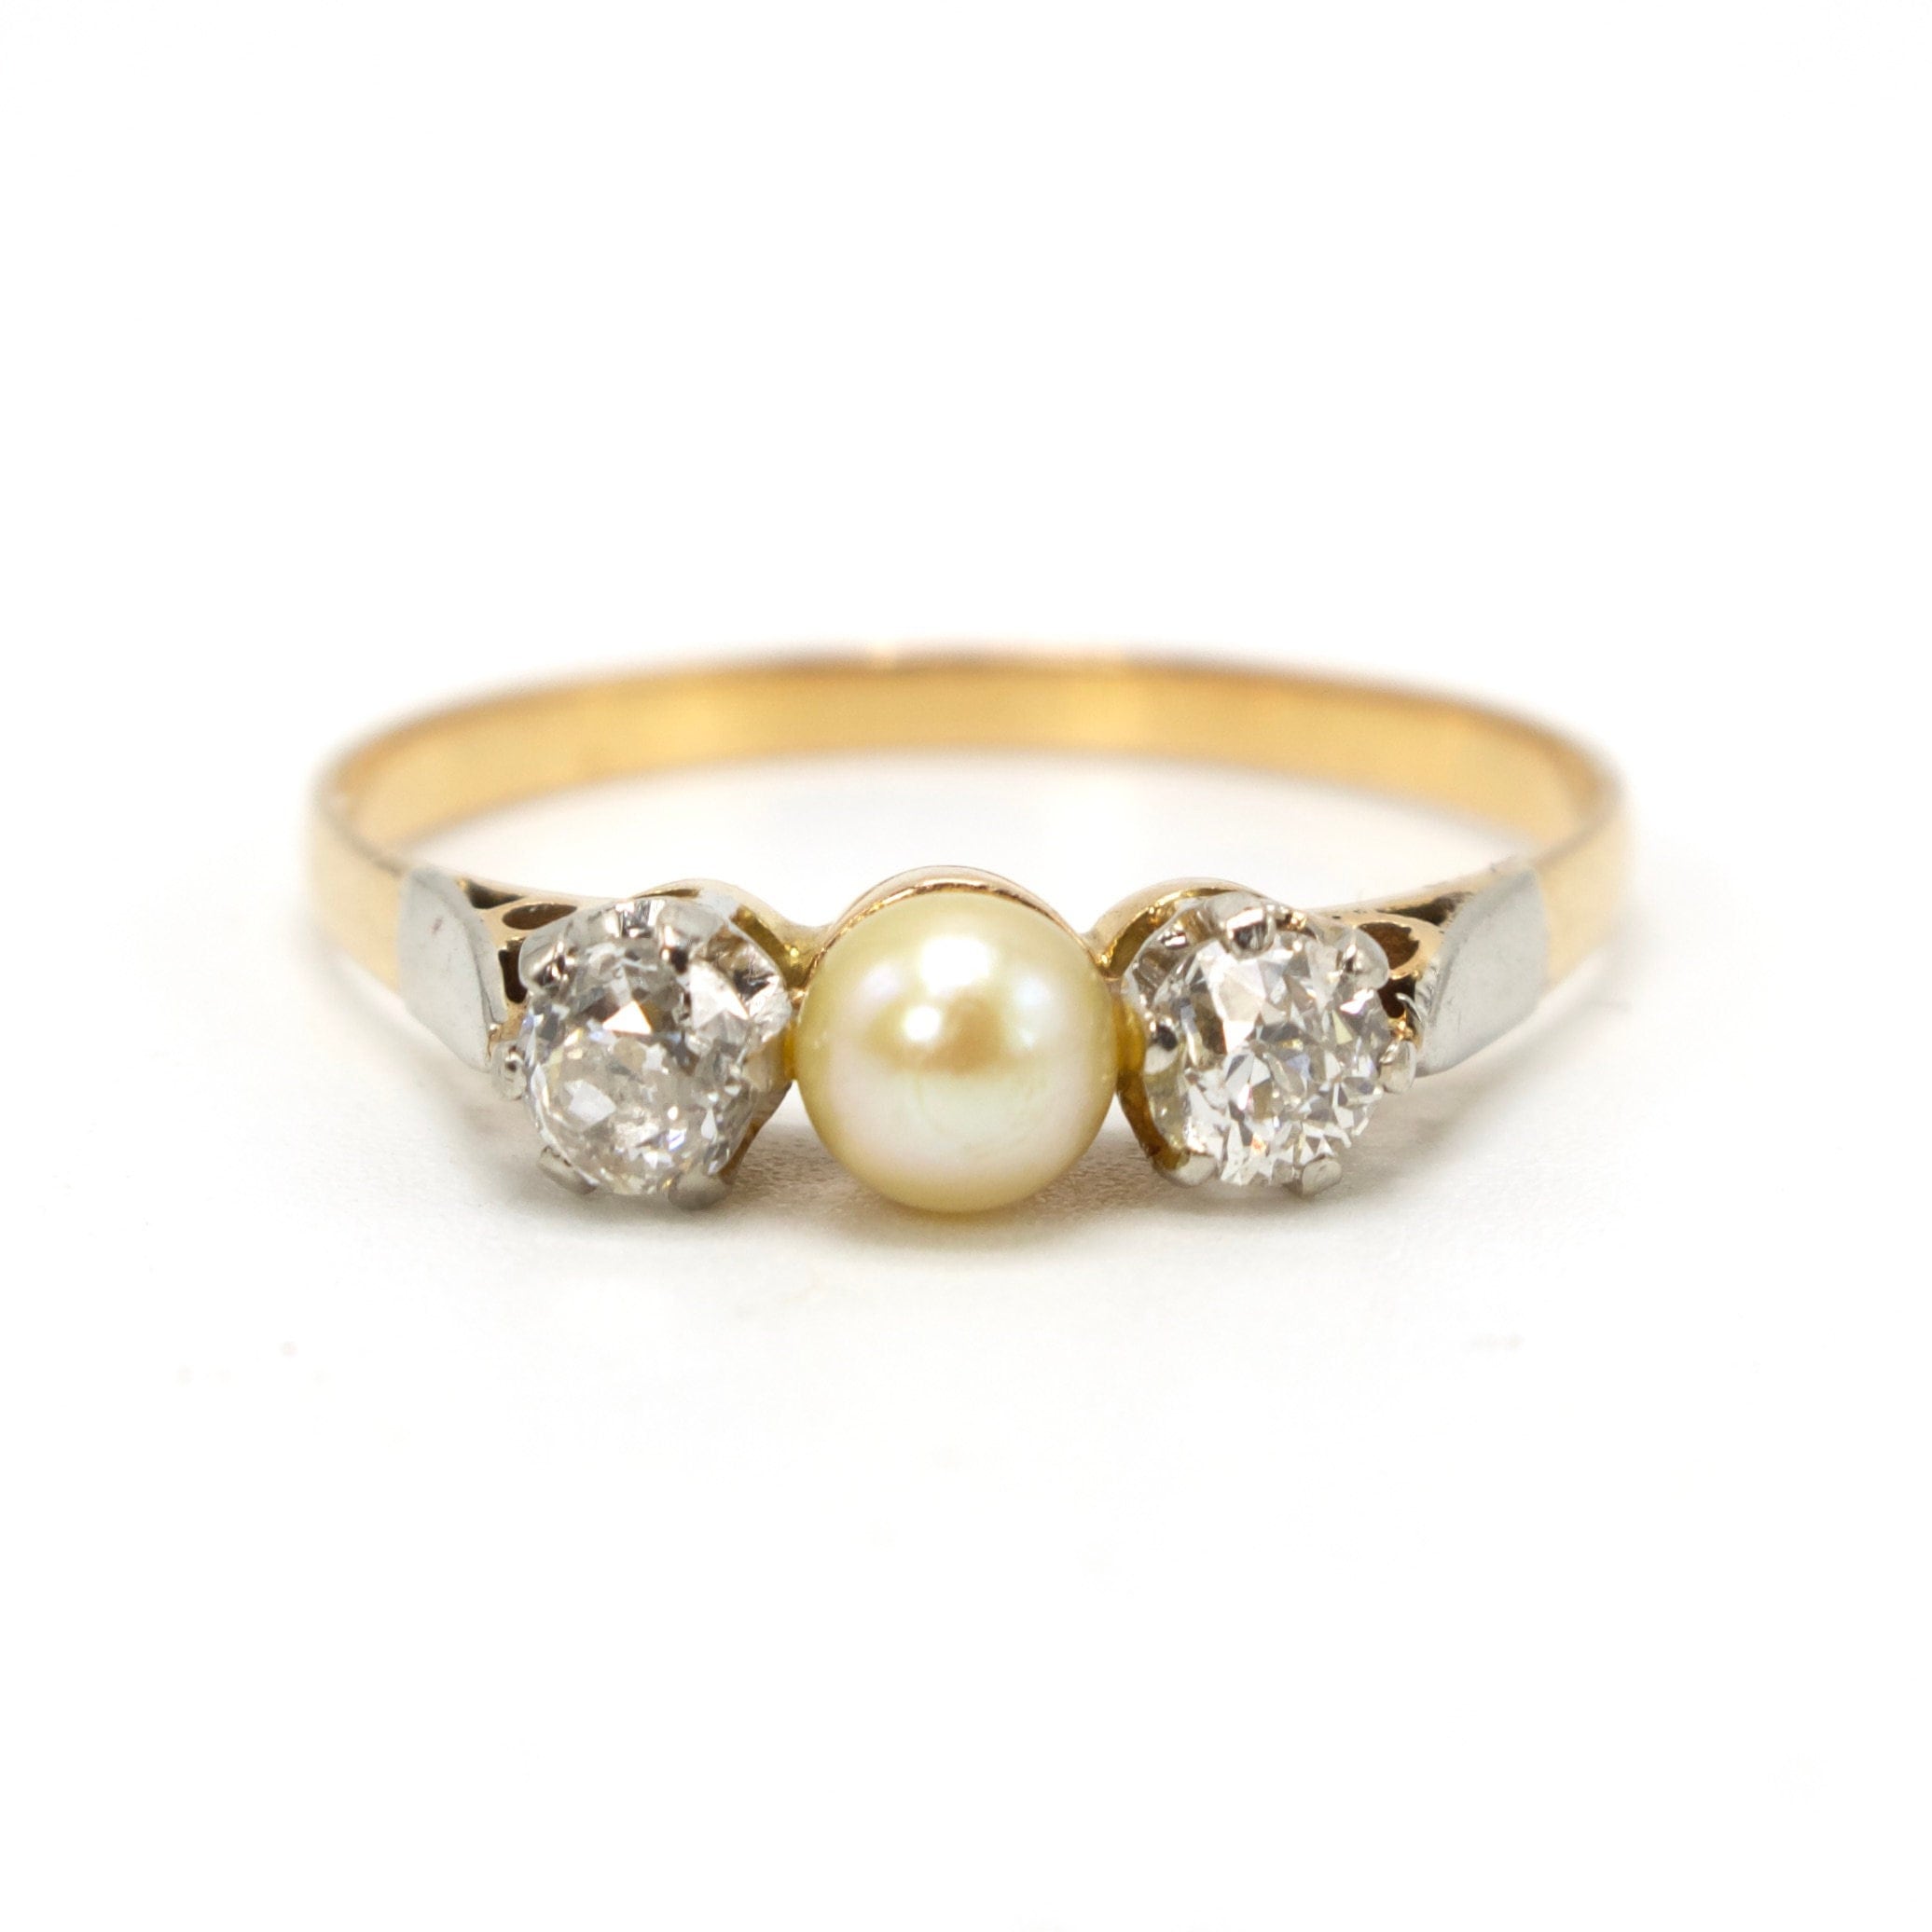 Antique Pearl and Mine Cut/European Cut Three Stone Ring in 18K Gold